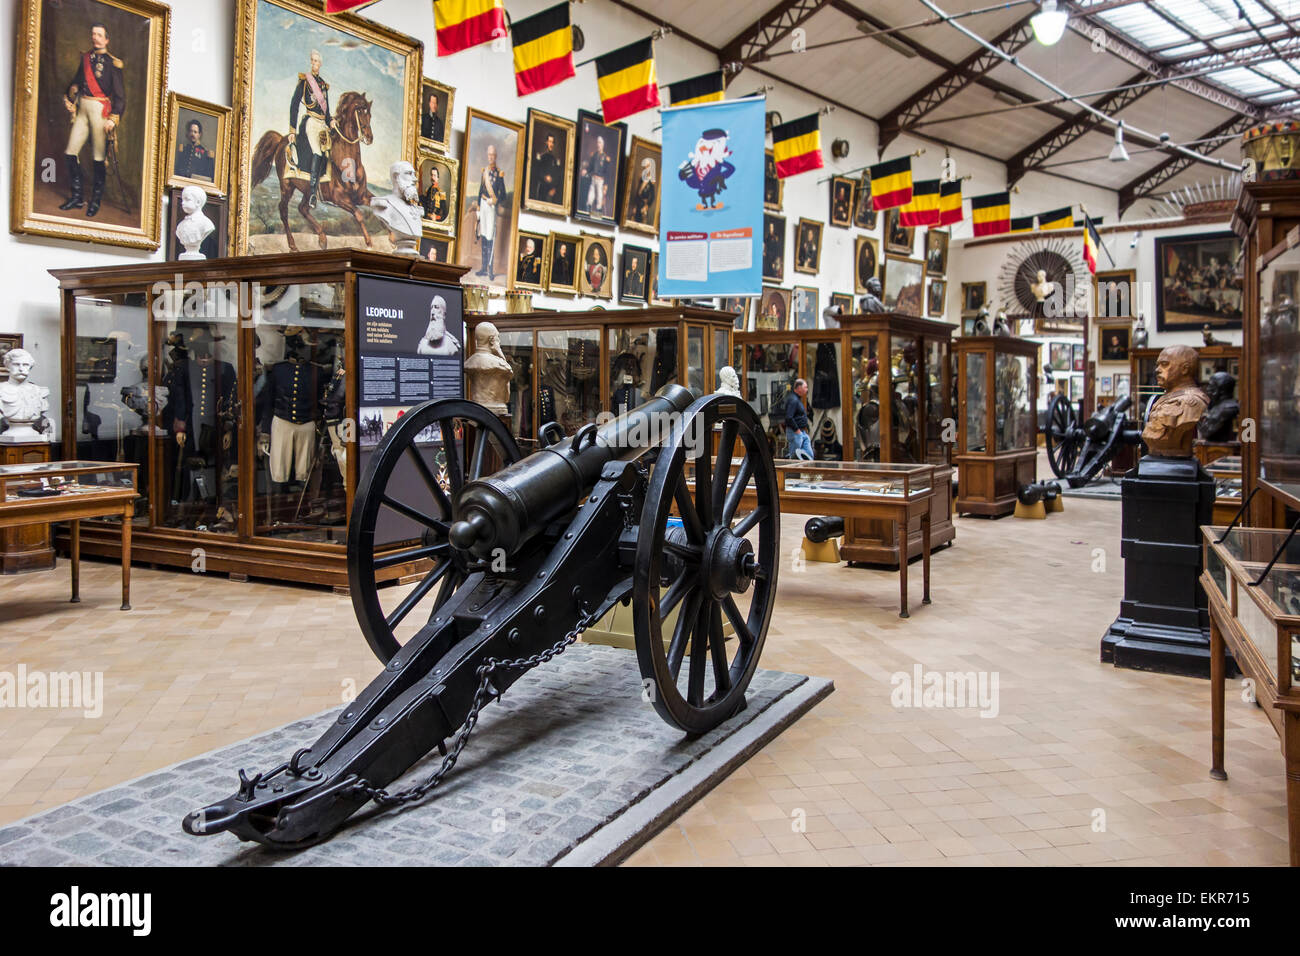 19th century cannons, weapons and uniforms at the Royal Museum of the Armed Forces and Military History in Brussels, Belgium Stock Photo